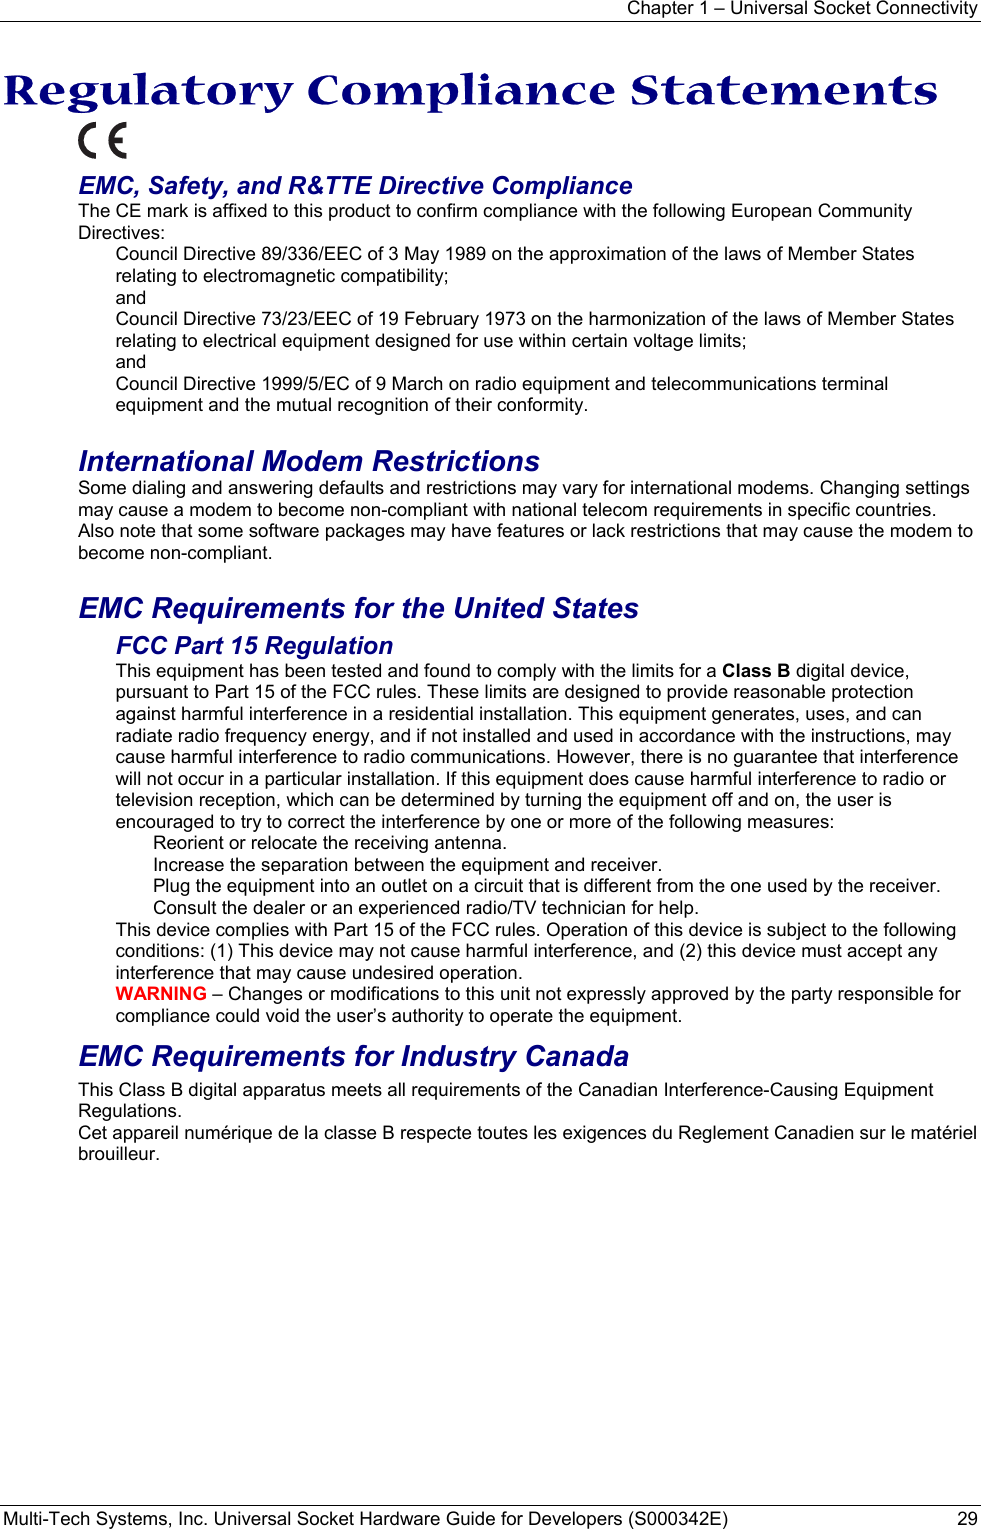 Chapter 1 – Universal Socket Connectivity Multi-Tech Systems, Inc. Universal Socket Hardware Guide for Developers (S000342E)  29  Regulatory Compliance Statements  EMC, Safety, and R&amp;TTE Directive Compliance The CE mark is affixed to this product to confirm compliance with the following European Community Directives: Council Directive 89/336/EEC of 3 May 1989 on the approximation of the laws of Member States relating to electromagnetic compatibility;  and Council Directive 73/23/EEC of 19 February 1973 on the harmonization of the laws of Member States relating to electrical equipment designed for use within certain voltage limits; and Council Directive 1999/5/EC of 9 March on radio equipment and telecommunications terminal equipment and the mutual recognition of their conformity.   International Modem Restrictions Some dialing and answering defaults and restrictions may vary for international modems. Changing settings may cause a modem to become non-compliant with national telecom requirements in specific countries. Also note that some software packages may have features or lack restrictions that may cause the modem to become non-compliant.  EMC Requirements for the United States FCC Part 15 Regulation This equipment has been tested and found to comply with the limits for a Class B digital device, pursuant to Part 15 of the FCC rules. These limits are designed to provide reasonable protection against harmful interference in a residential installation. This equipment generates, uses, and can radiate radio frequency energy, and if not installed and used in accordance with the instructions, may cause harmful interference to radio communications. However, there is no guarantee that interference will not occur in a particular installation. If this equipment does cause harmful interference to radio or television reception, which can be determined by turning the equipment off and on, the user is encouraged to try to correct the interference by one or more of the following measures: Reorient or relocate the receiving antenna. Increase the separation between the equipment and receiver. Plug the equipment into an outlet on a circuit that is different from the one used by the receiver. Consult the dealer or an experienced radio/TV technician for help. This device complies with Part 15 of the FCC rules. Operation of this device is subject to the following conditions: (1) This device may not cause harmful interference, and (2) this device must accept any interference that may cause undesired operation. WARNING – Changes or modifications to this unit not expressly approved by the party responsible for compliance could void the user’s authority to operate the equipment. EMC Requirements for Industry Canada This Class B digital apparatus meets all requirements of the Canadian Interference-Causing Equipment Regulations. Cet appareil numérique de la classe B respecte toutes les exigences du Reglement Canadien sur le matériel brouilleur. 